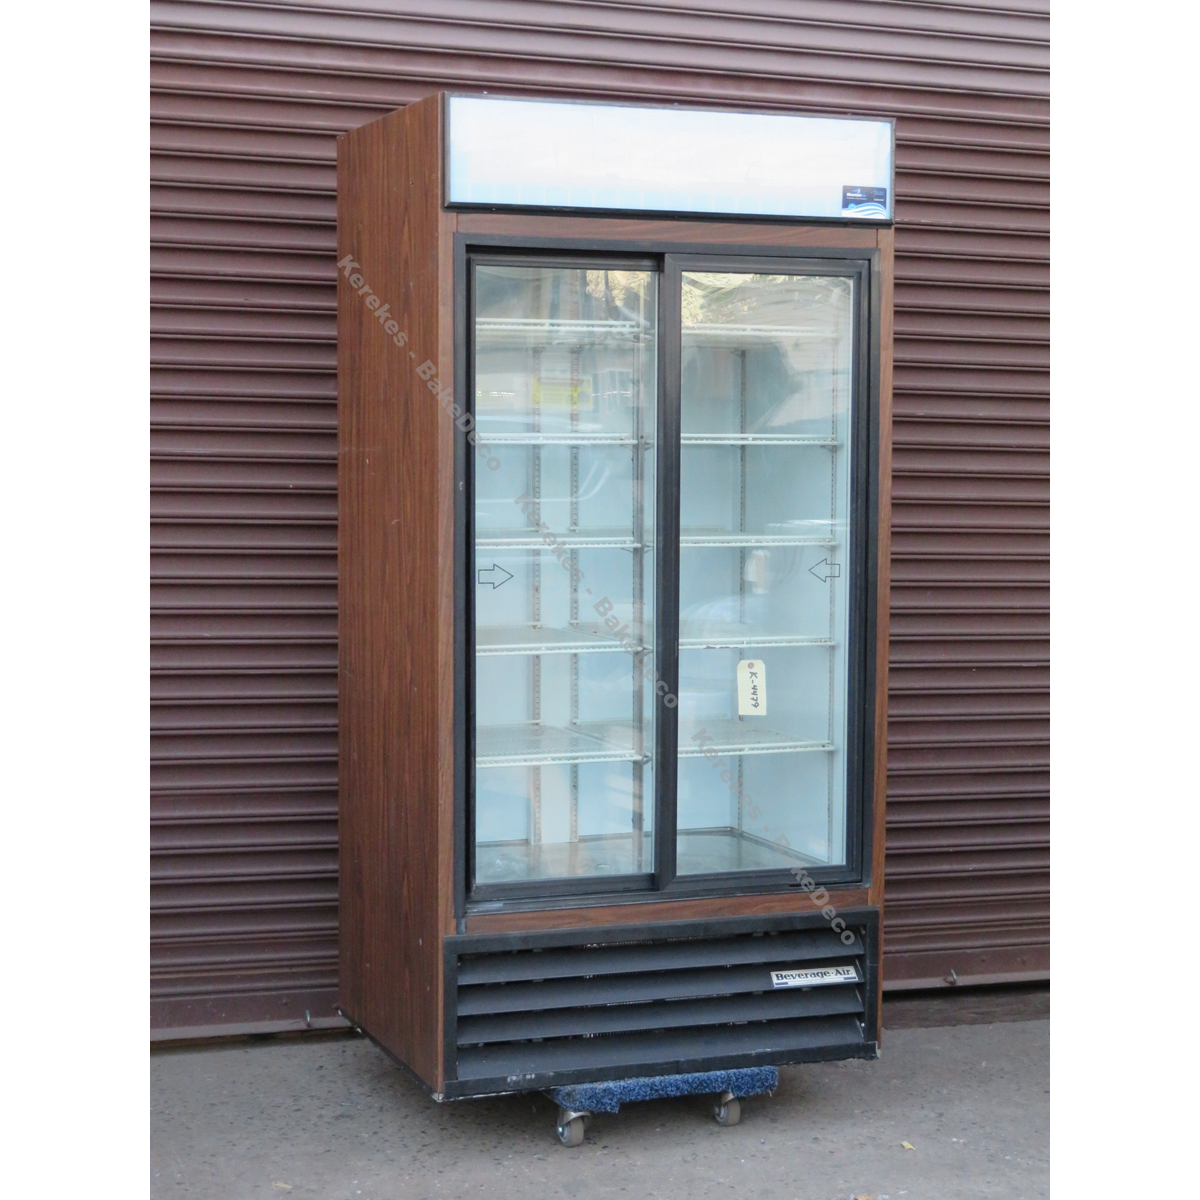 Beverage Air Refrigerator MT33, Used Very Good Condition